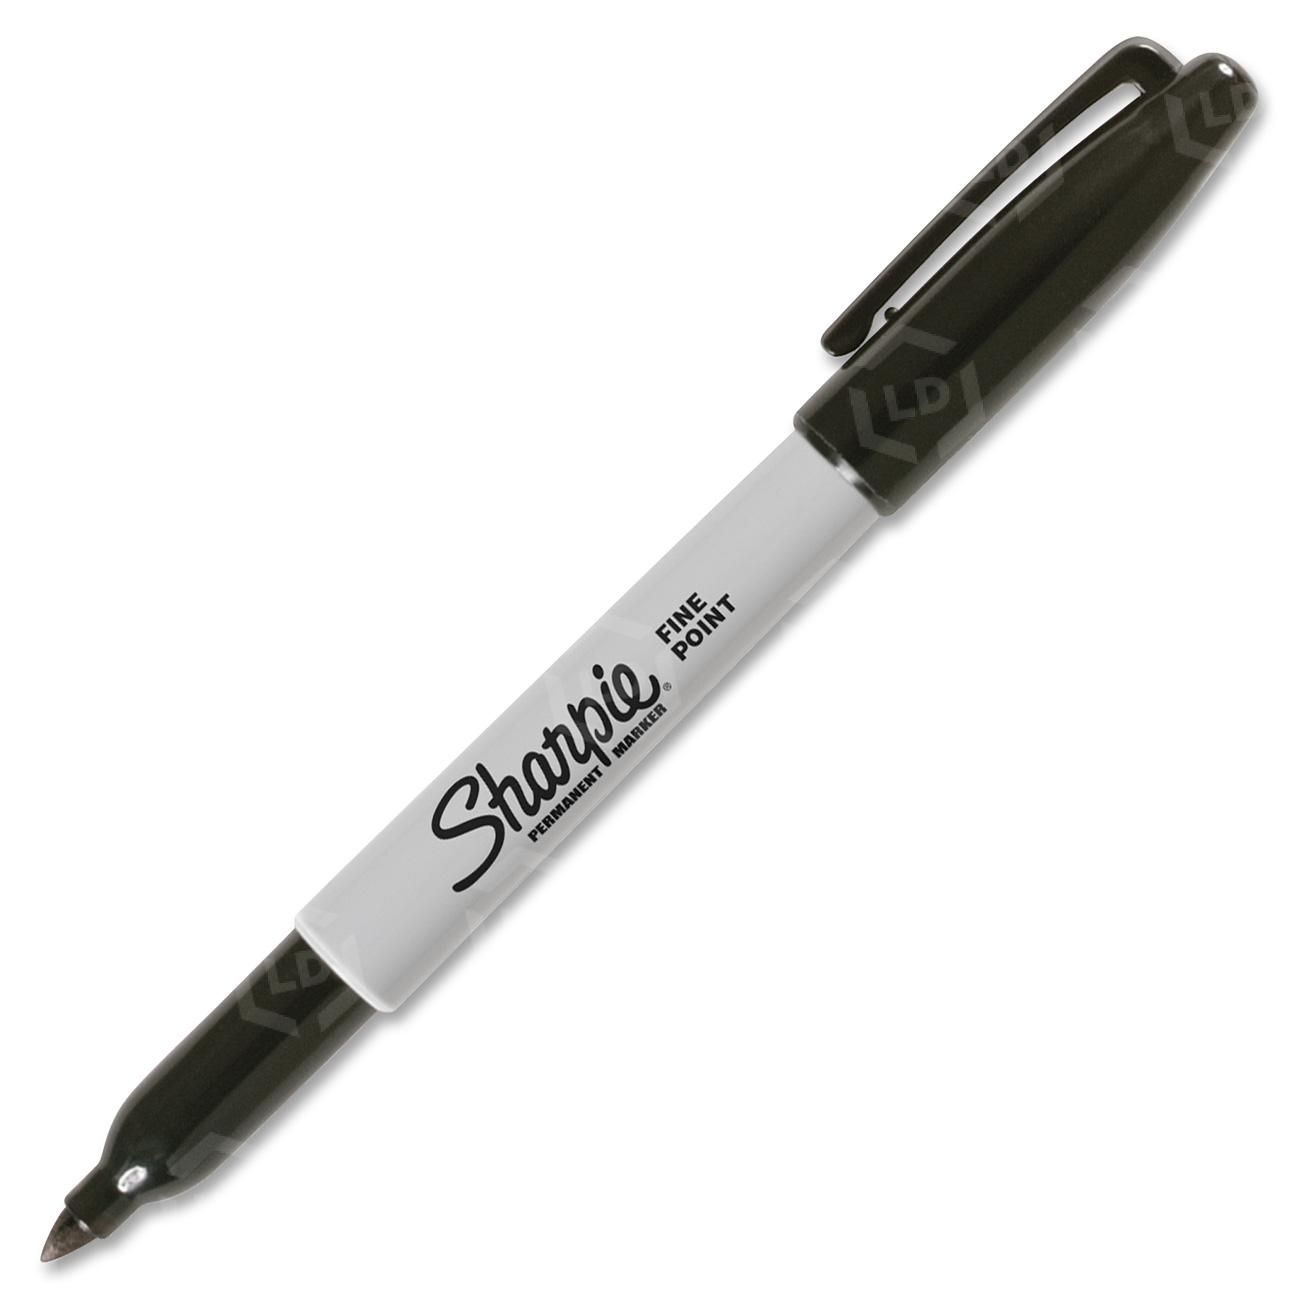 Sharpie King-Size Marker - LD Products